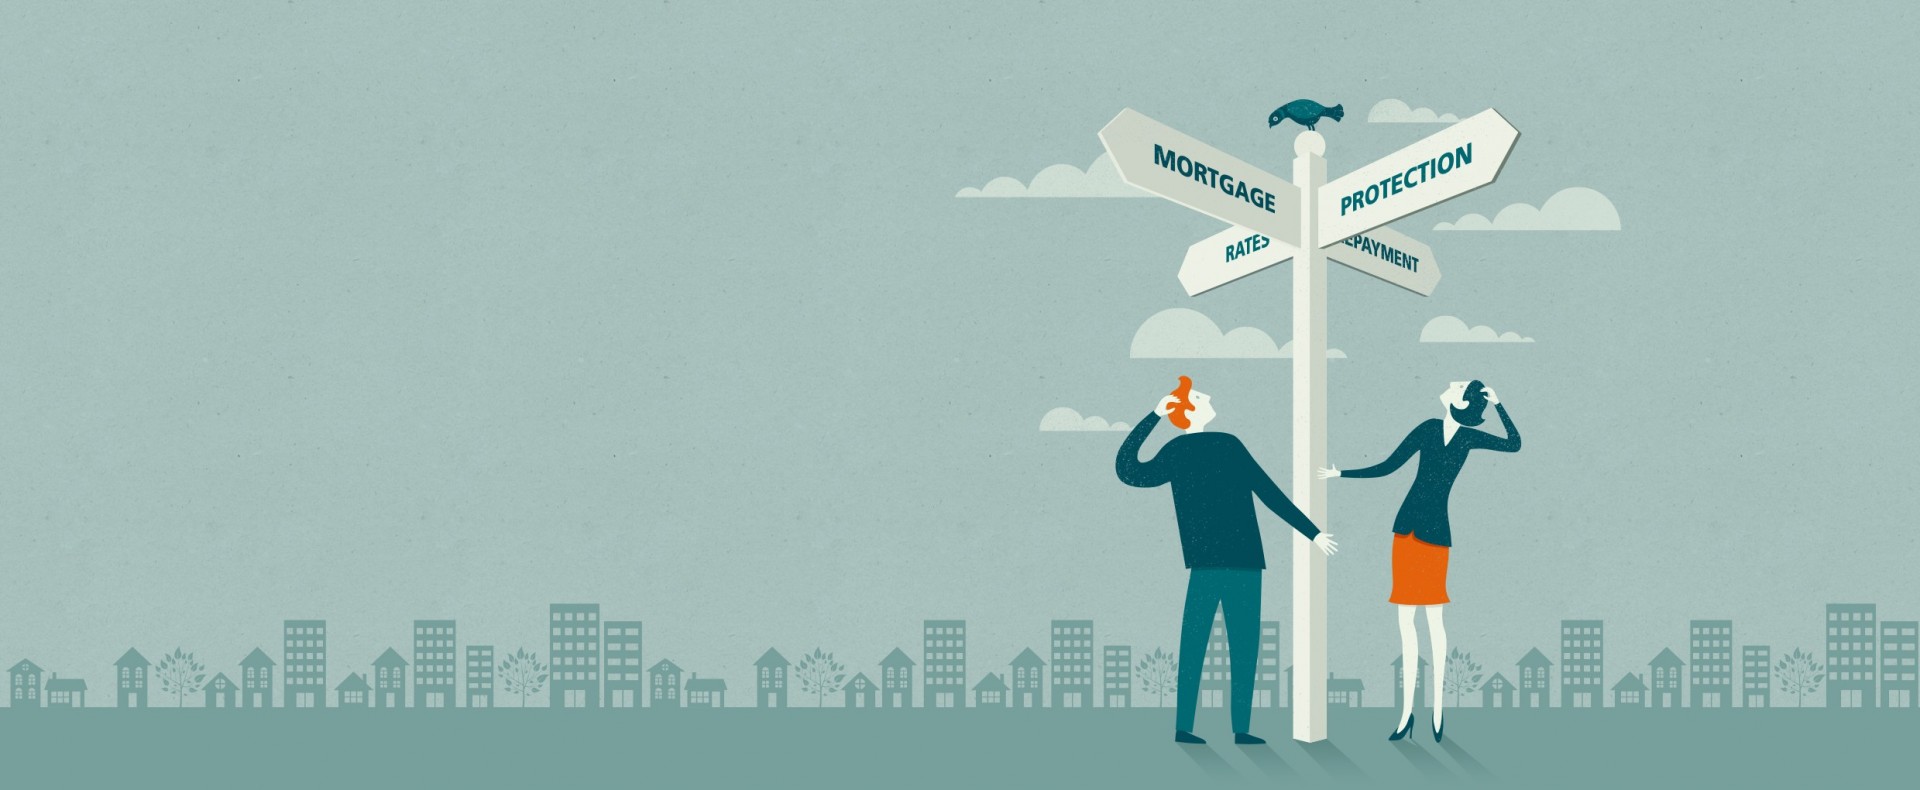 Mortgages and protection choices. Confused people looking at signpost. Cityscape silhouette